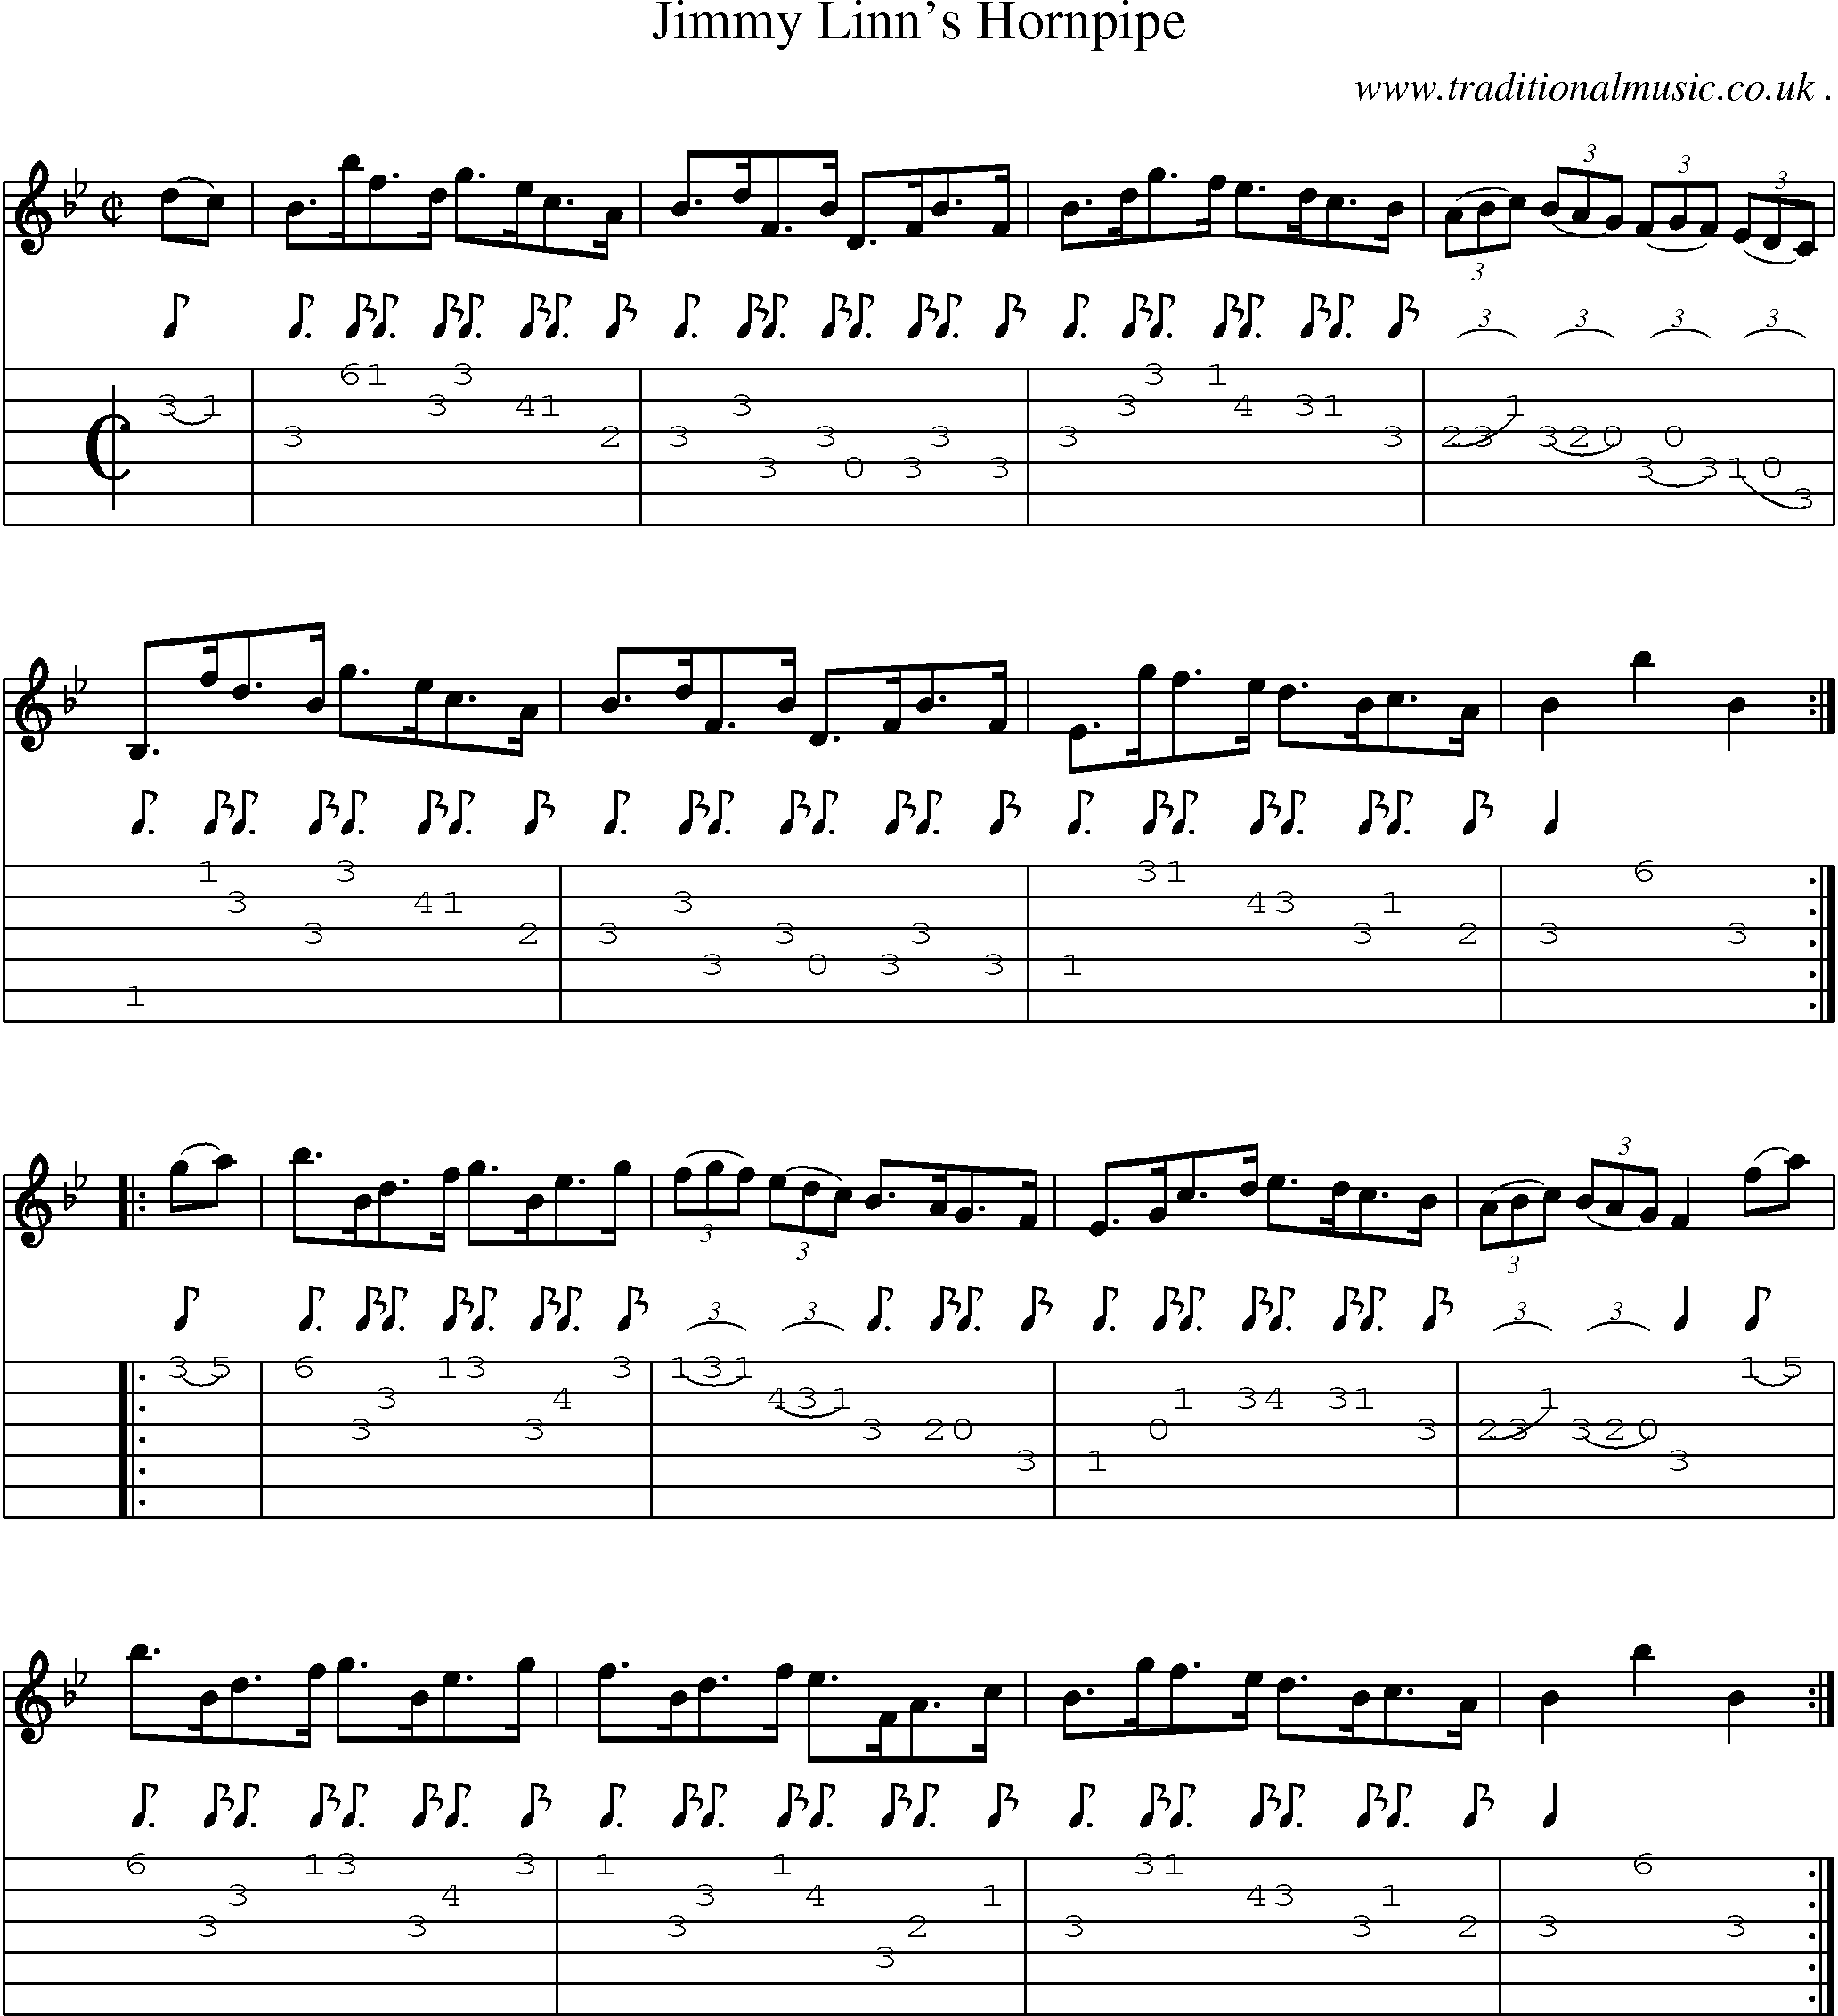 Sheet-Music and Guitar Tabs for Jimmy Linns Hornpipe